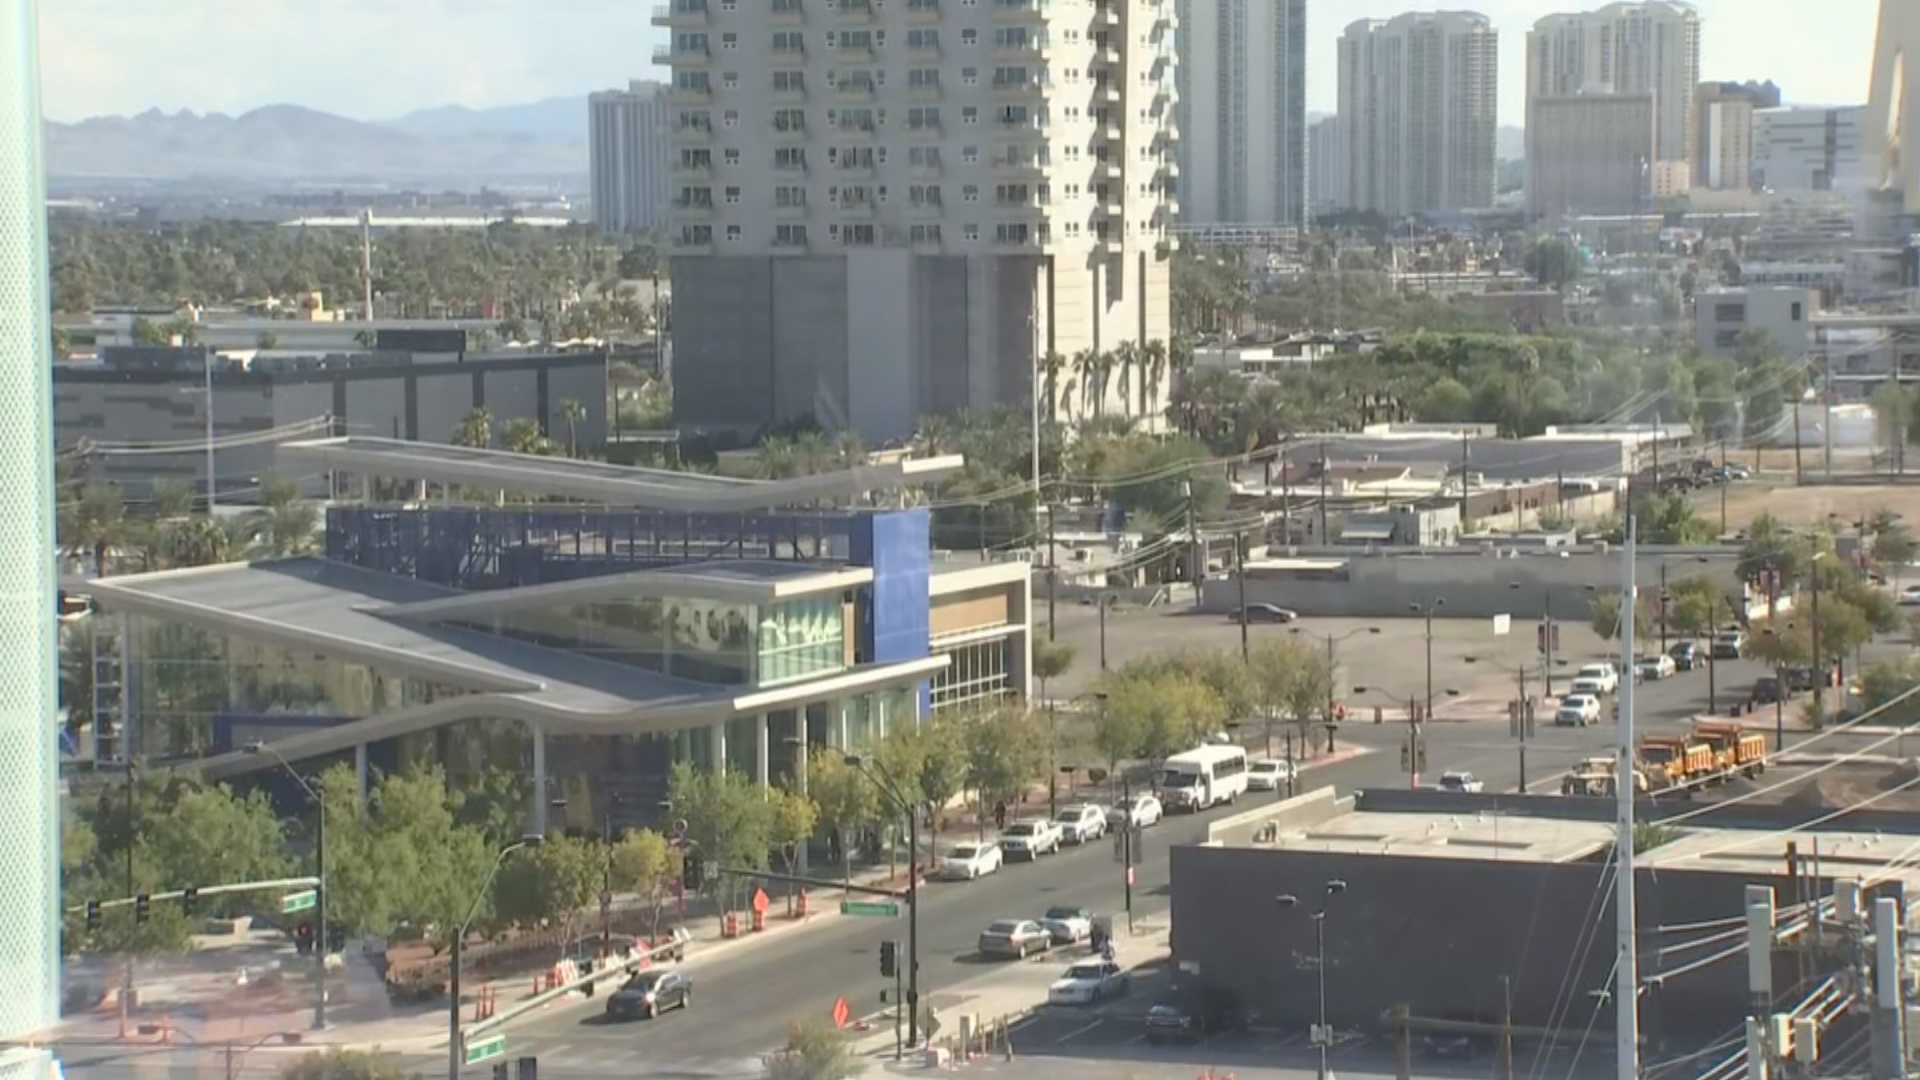 Project Enchilada is master plan for downtown Las Vegas